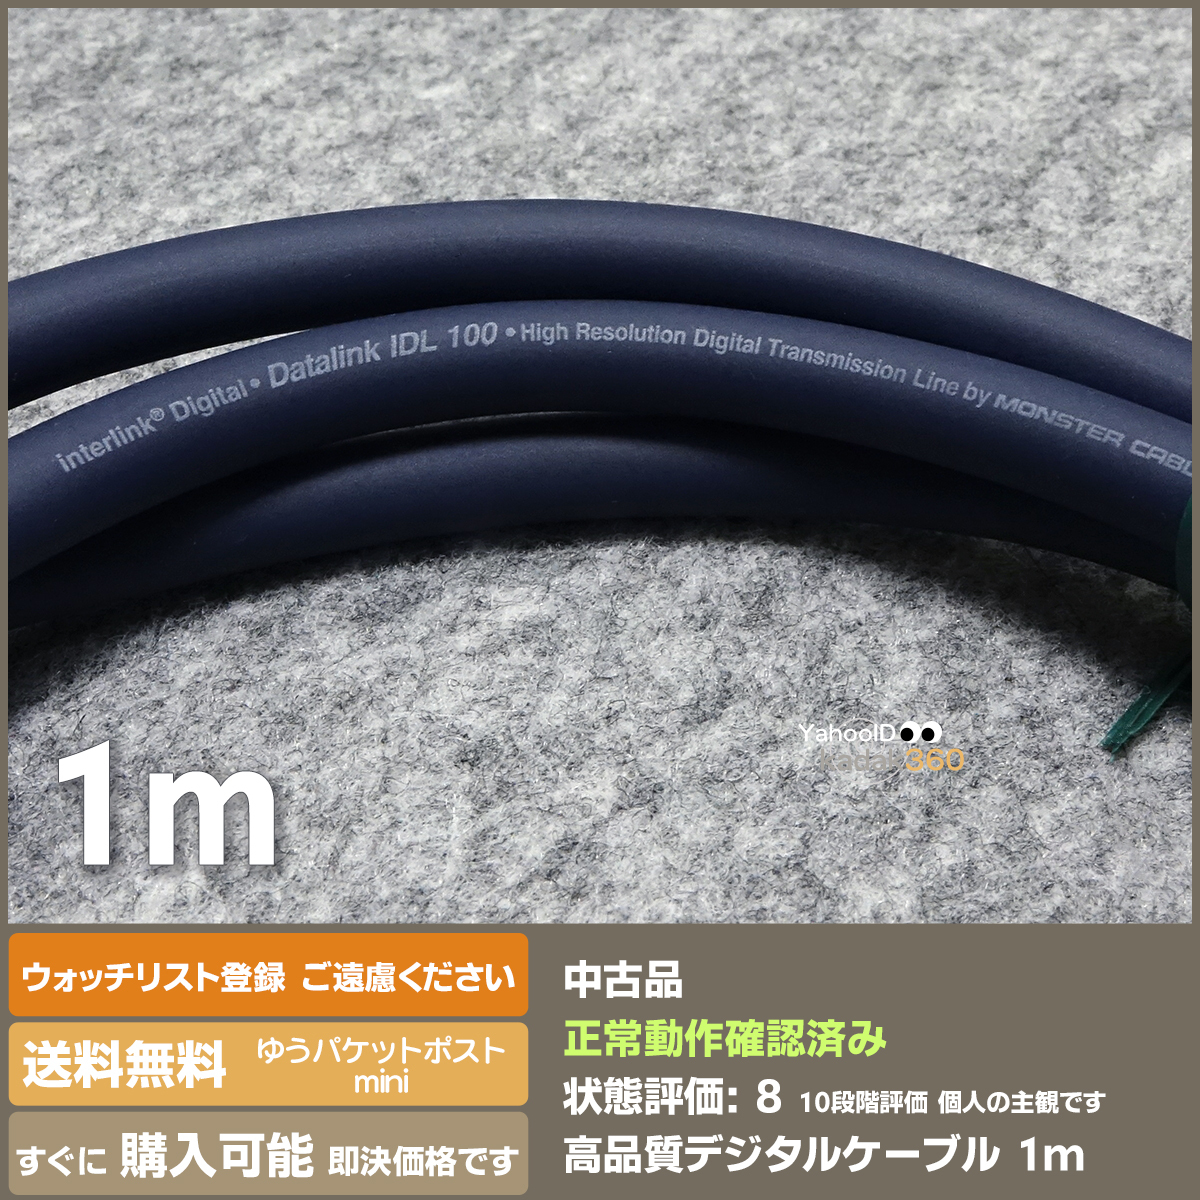  prompt decision free shipping condition excellent Interlink MONSTER CABLE Datalink IDL 100 1m